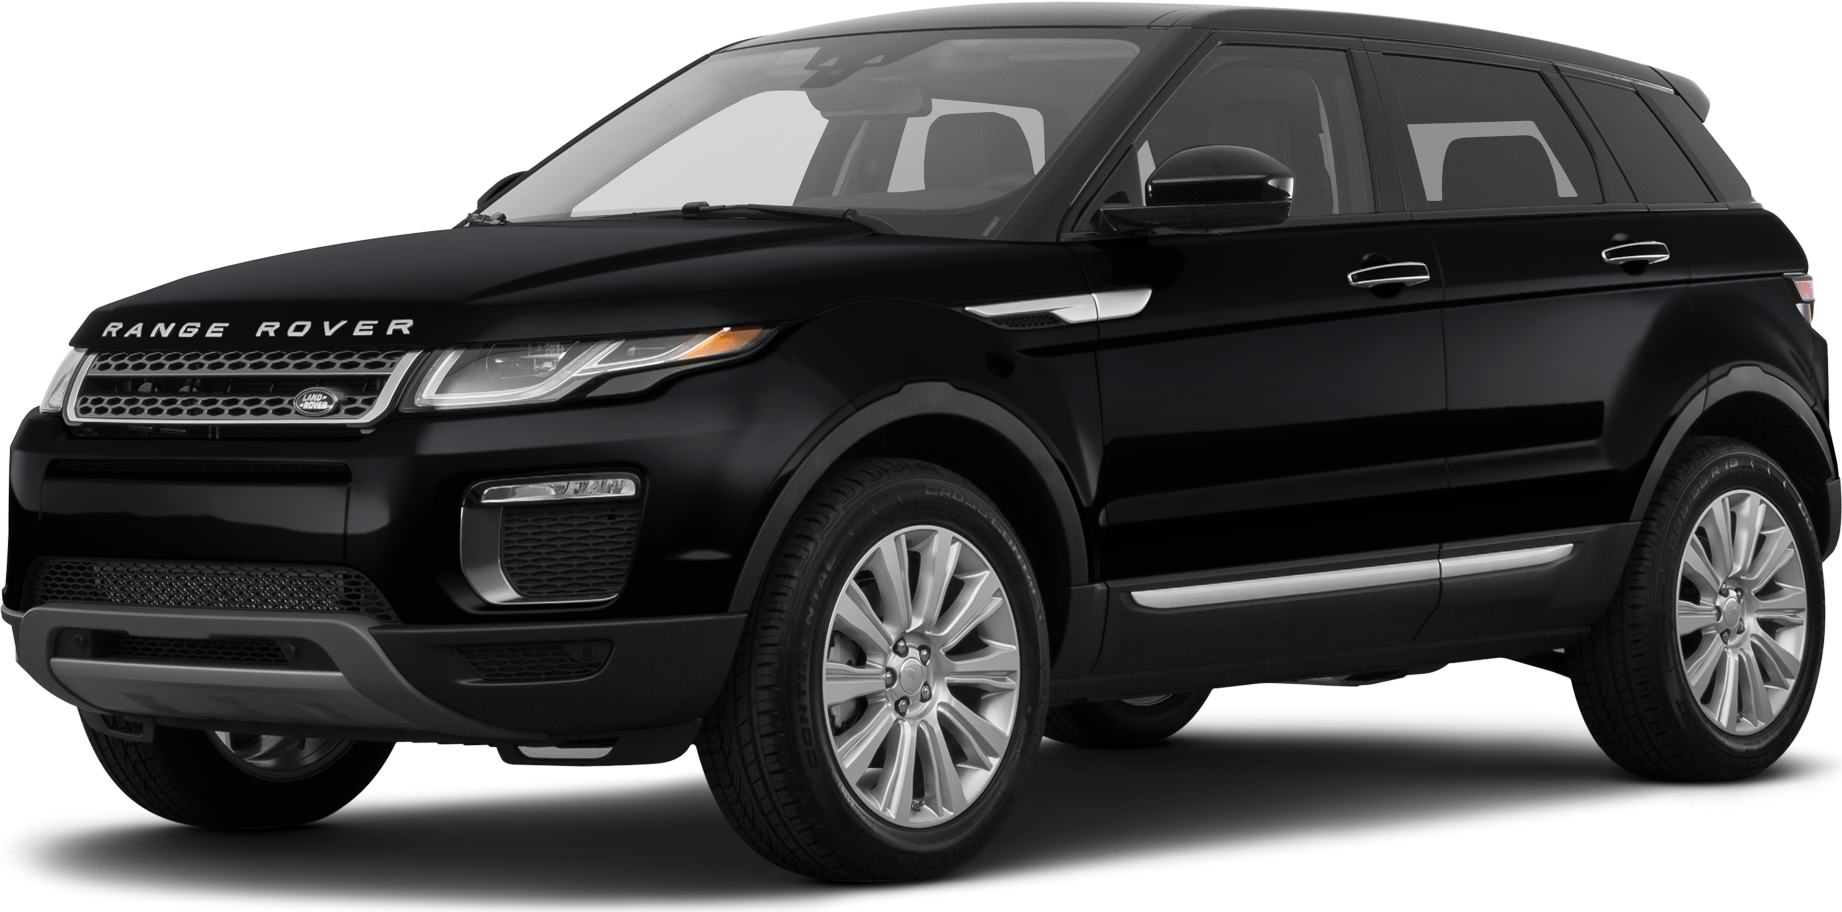 2017 Land Rover Range Rover Evoque Price Value Ratings And Reviews